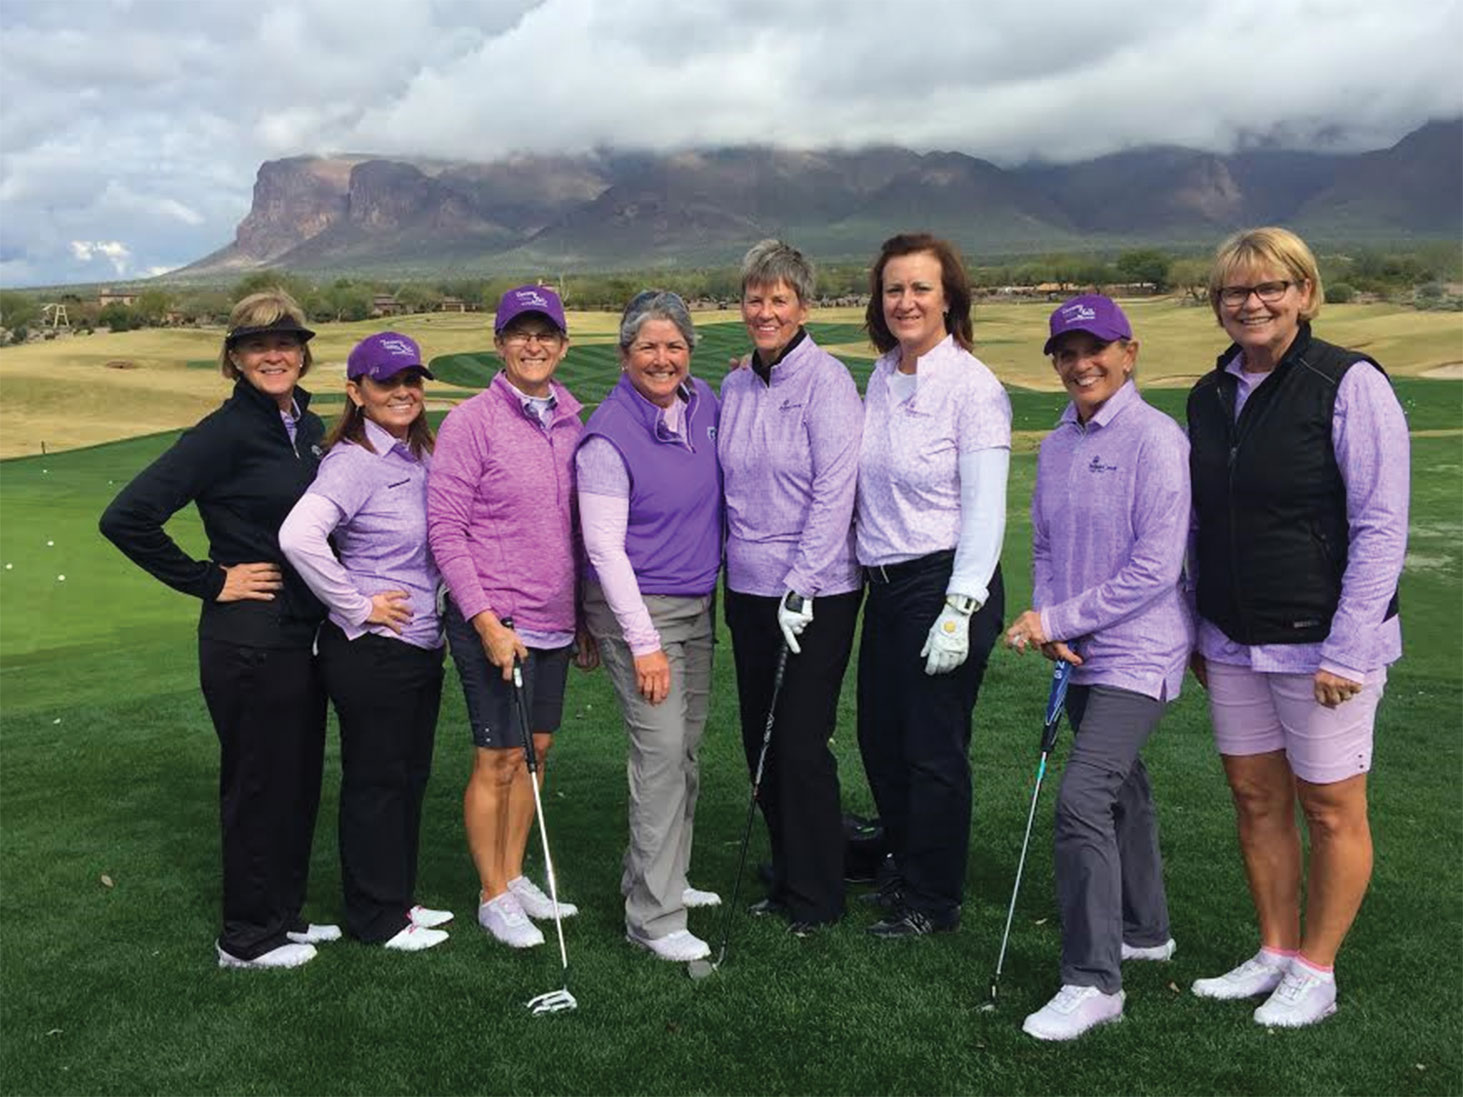 Lost Gold Course at Superstition Mountain, left to right: Mary Harris, Amber Rivera, Sarah Marsh, Ellen Enright, Mary Falso, Monica Lee, Marilyn Reynolds, Kathy Hubert-Wyss